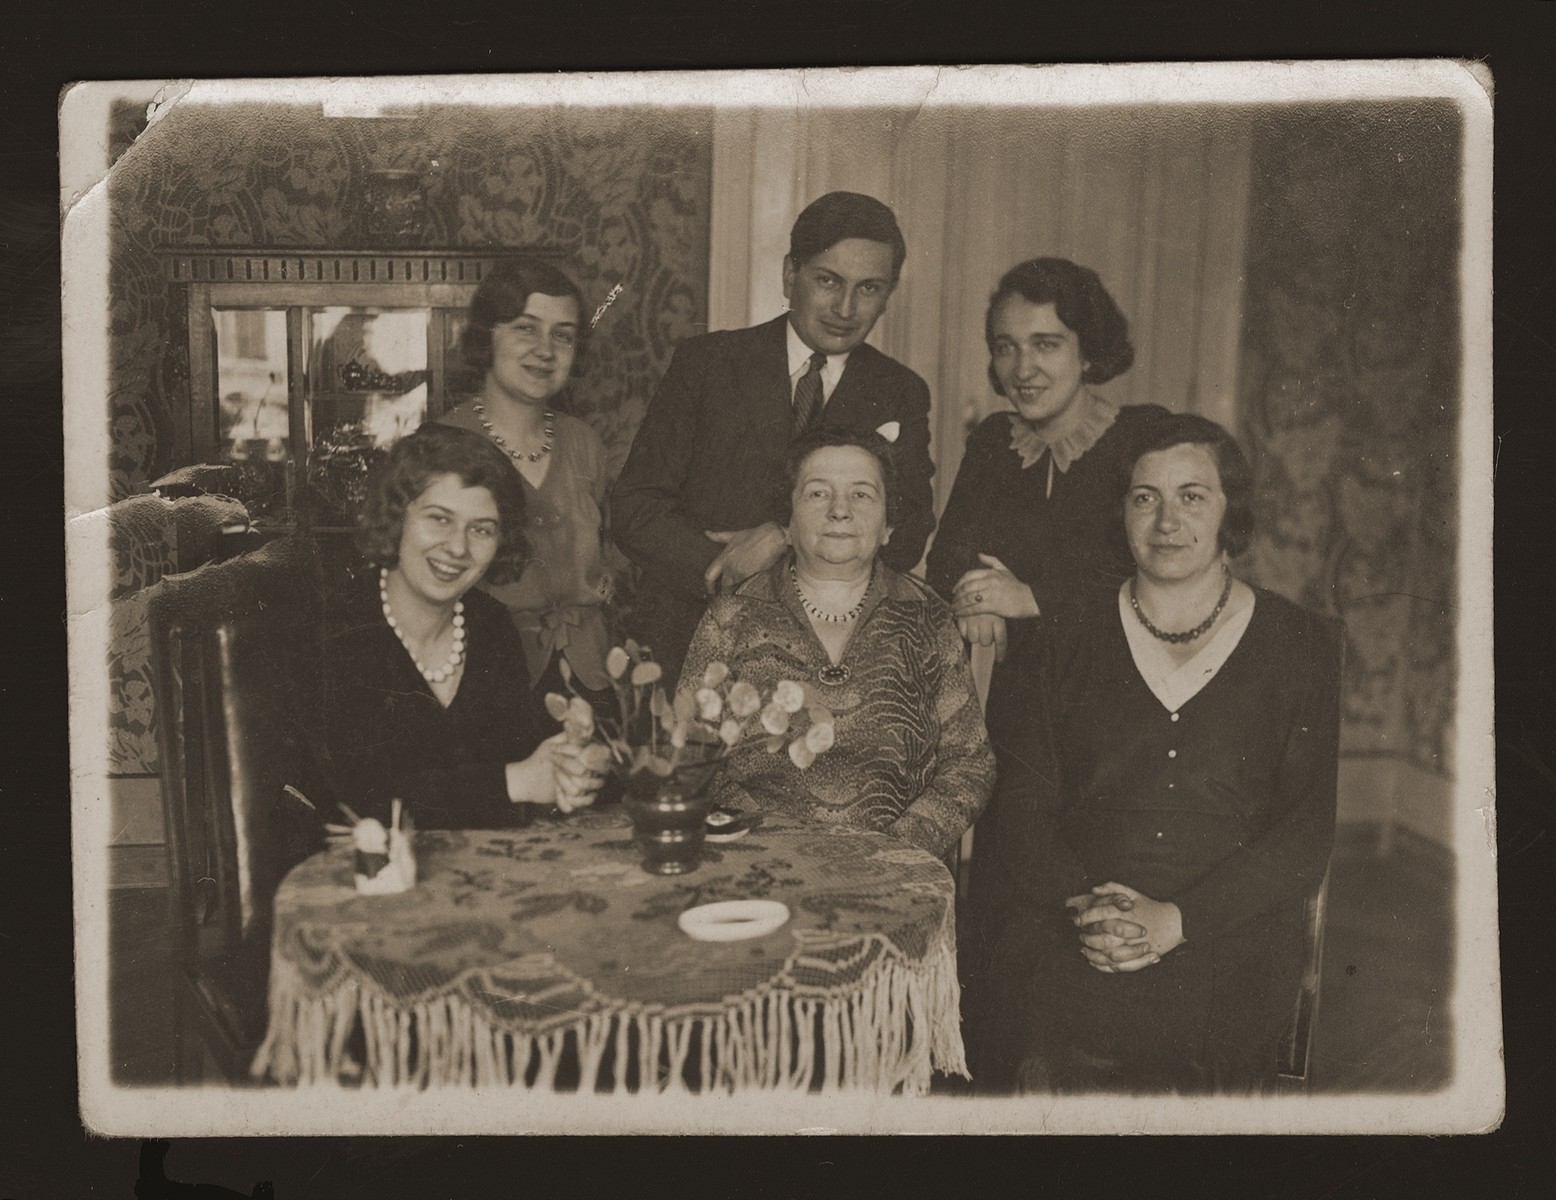 Prewar family portrait of the Erlich family in their home in Katowice.